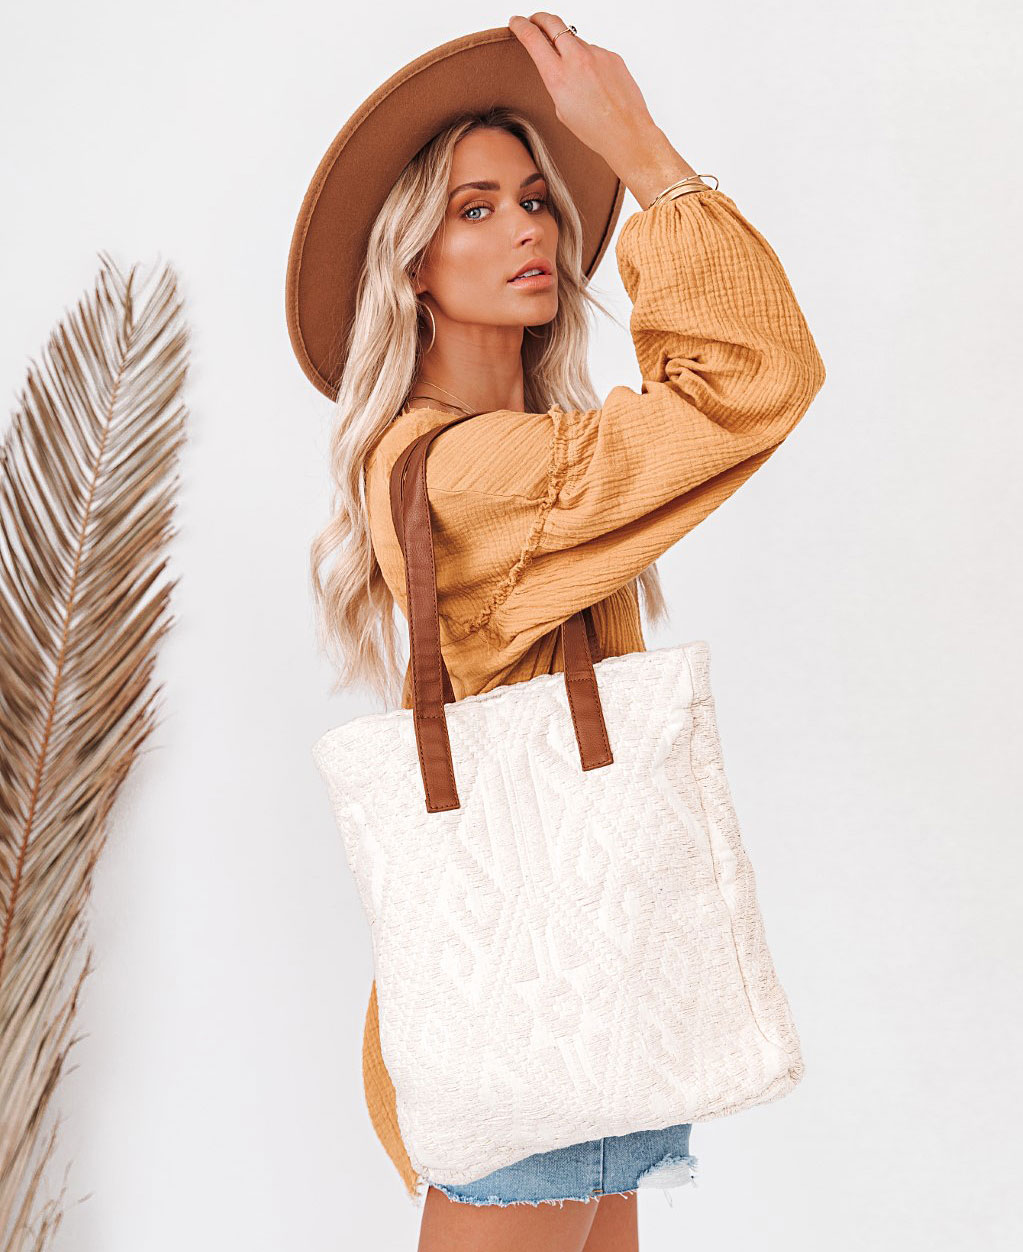 Cute Beach Bags for All Your Warm Weather Getaways: Photos